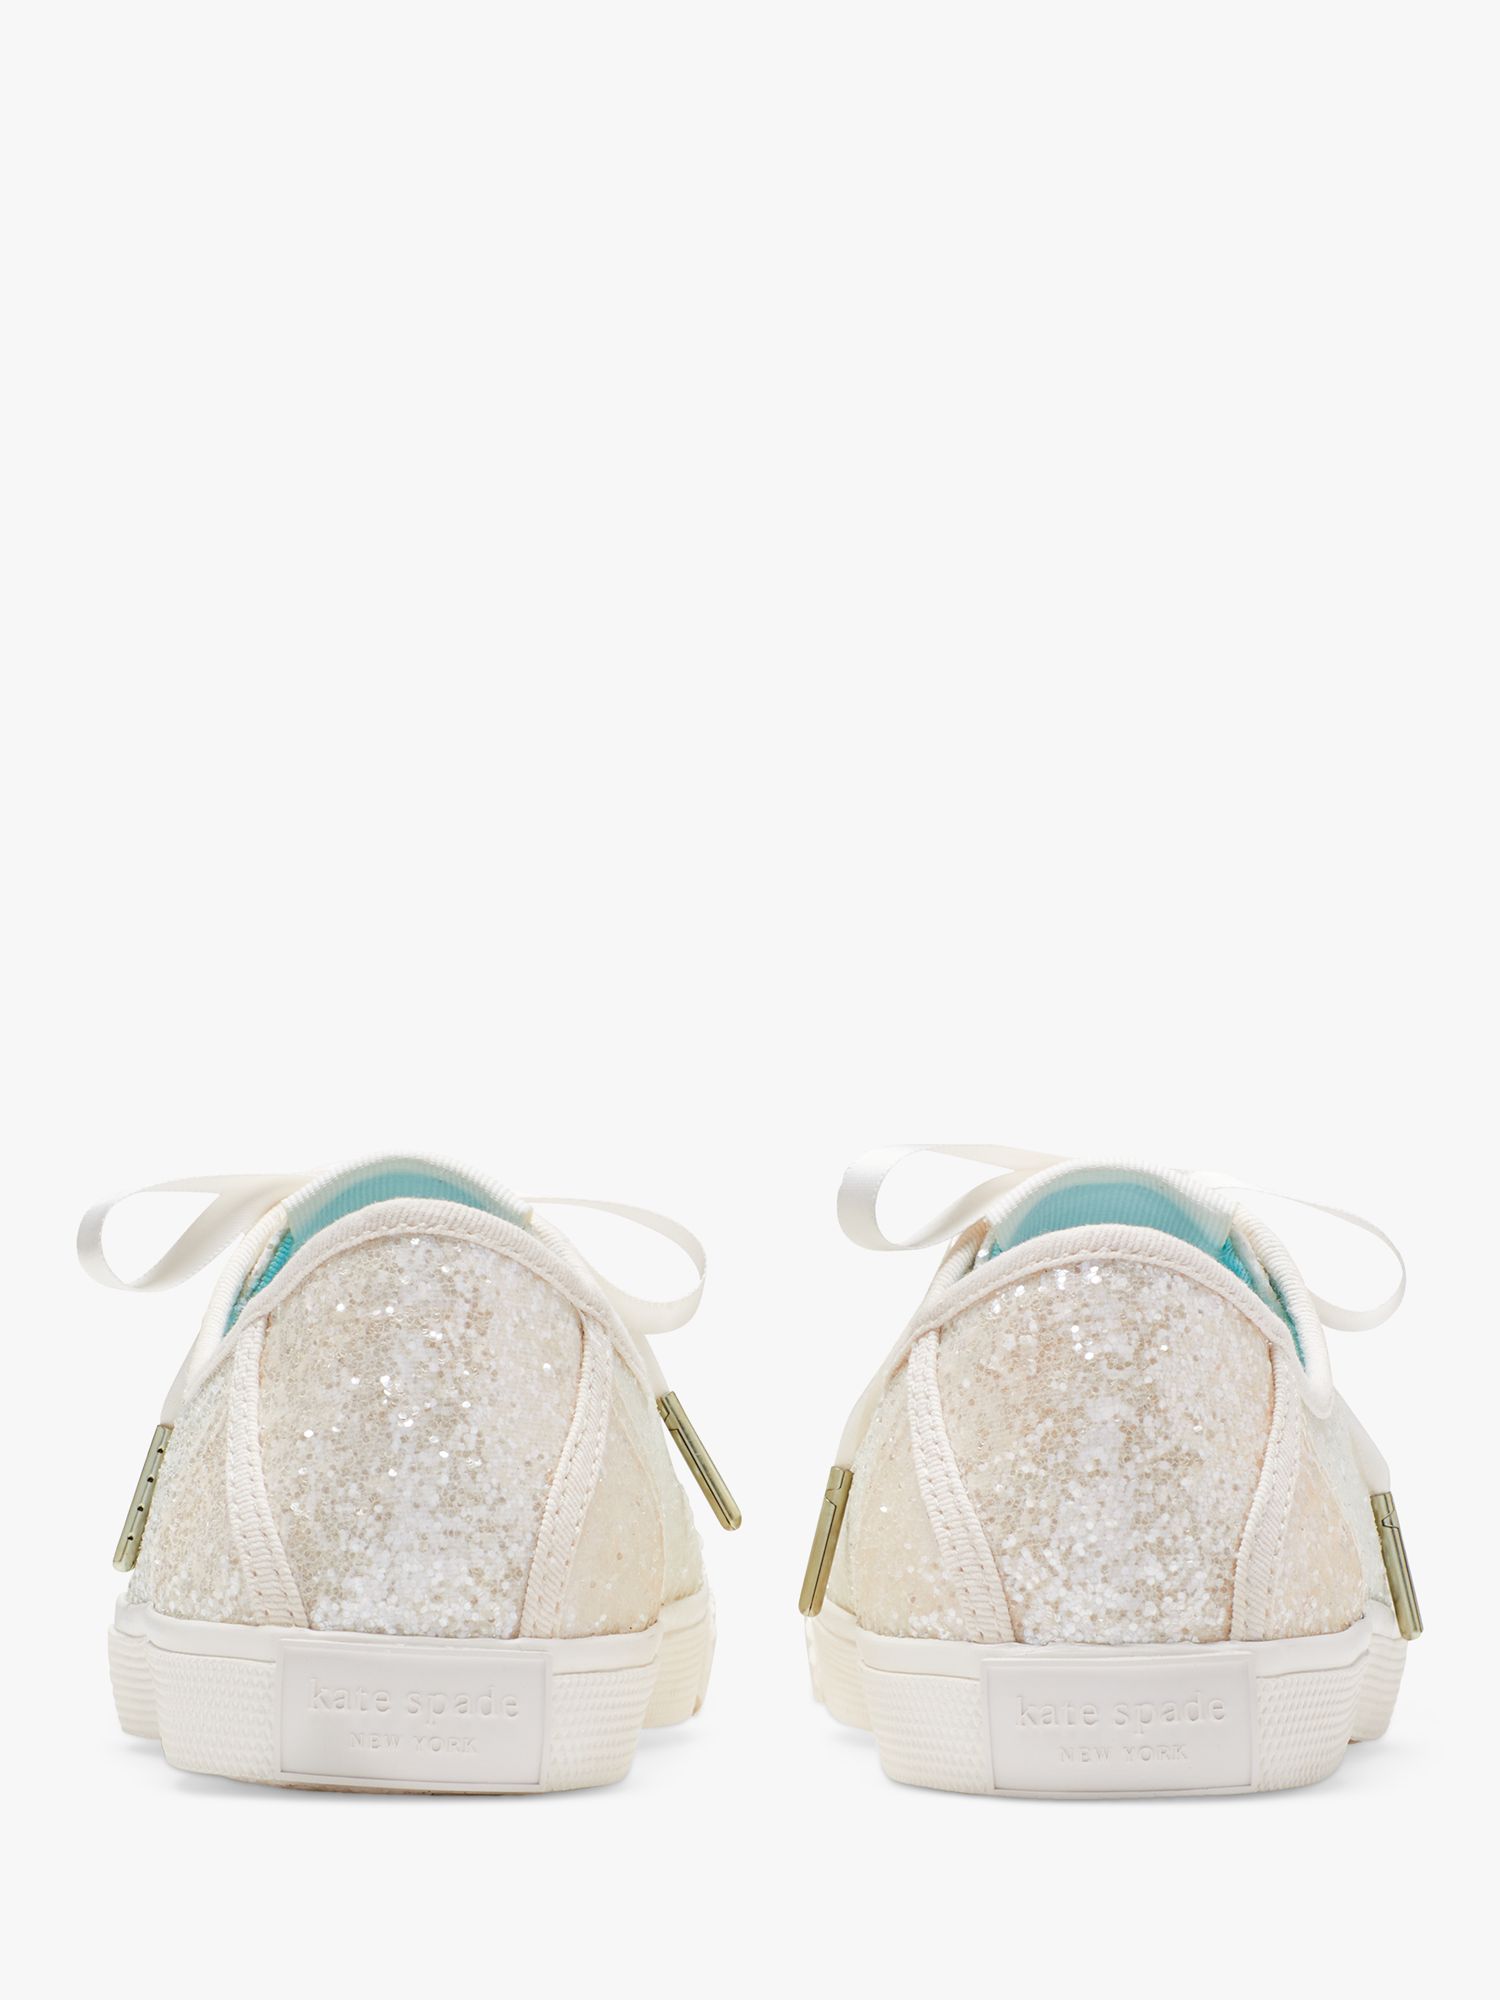 Buy kate spade new york Trista Glitter Trainers, Silver/Gold Online at johnlewis.com